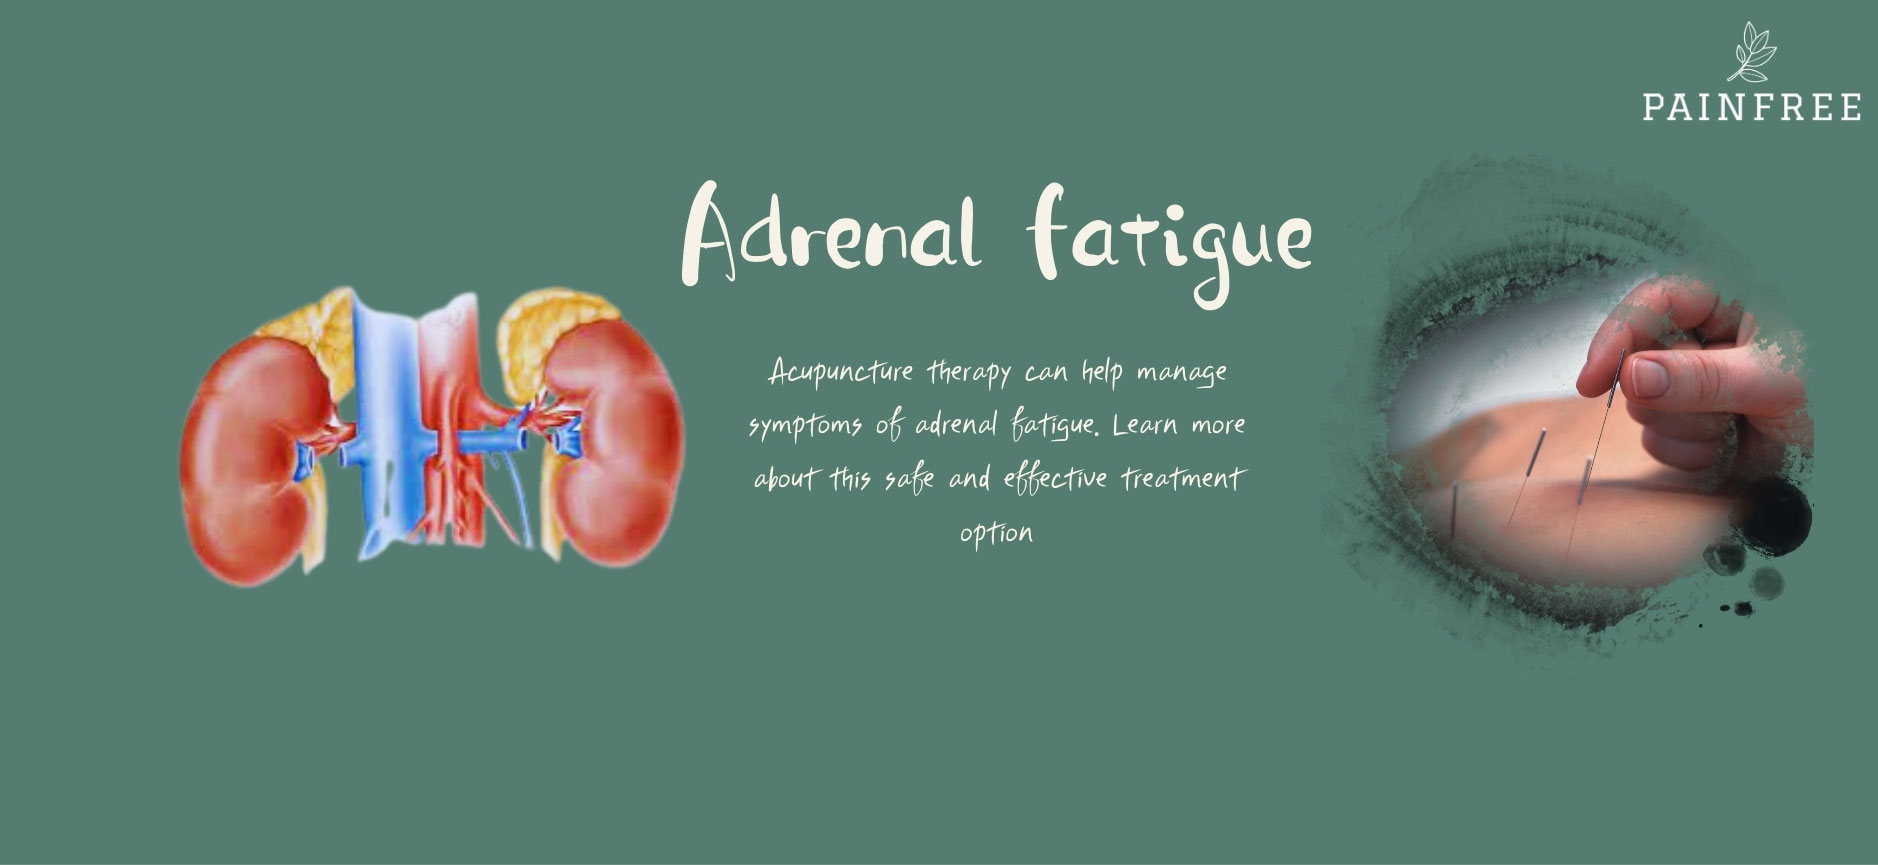 Acupuncture for Adrenal Fatigue